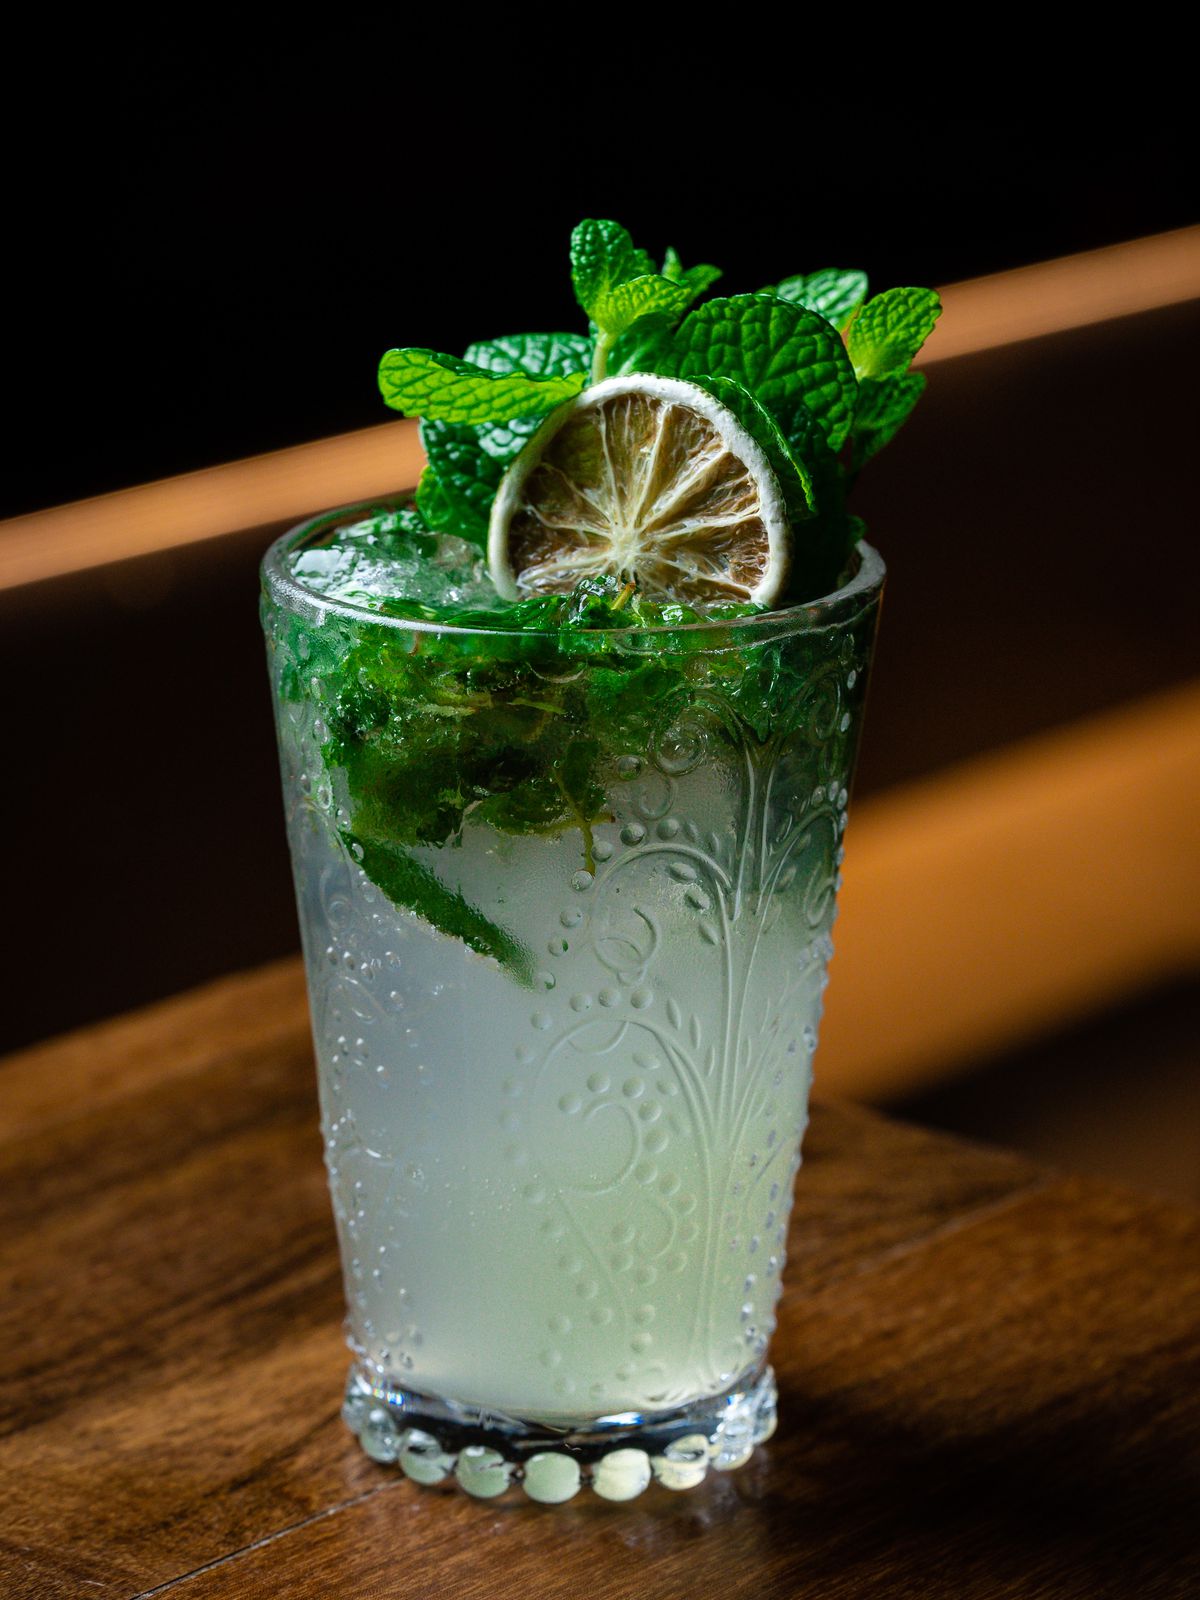 A cocktail garnished with mint leaves and lime.